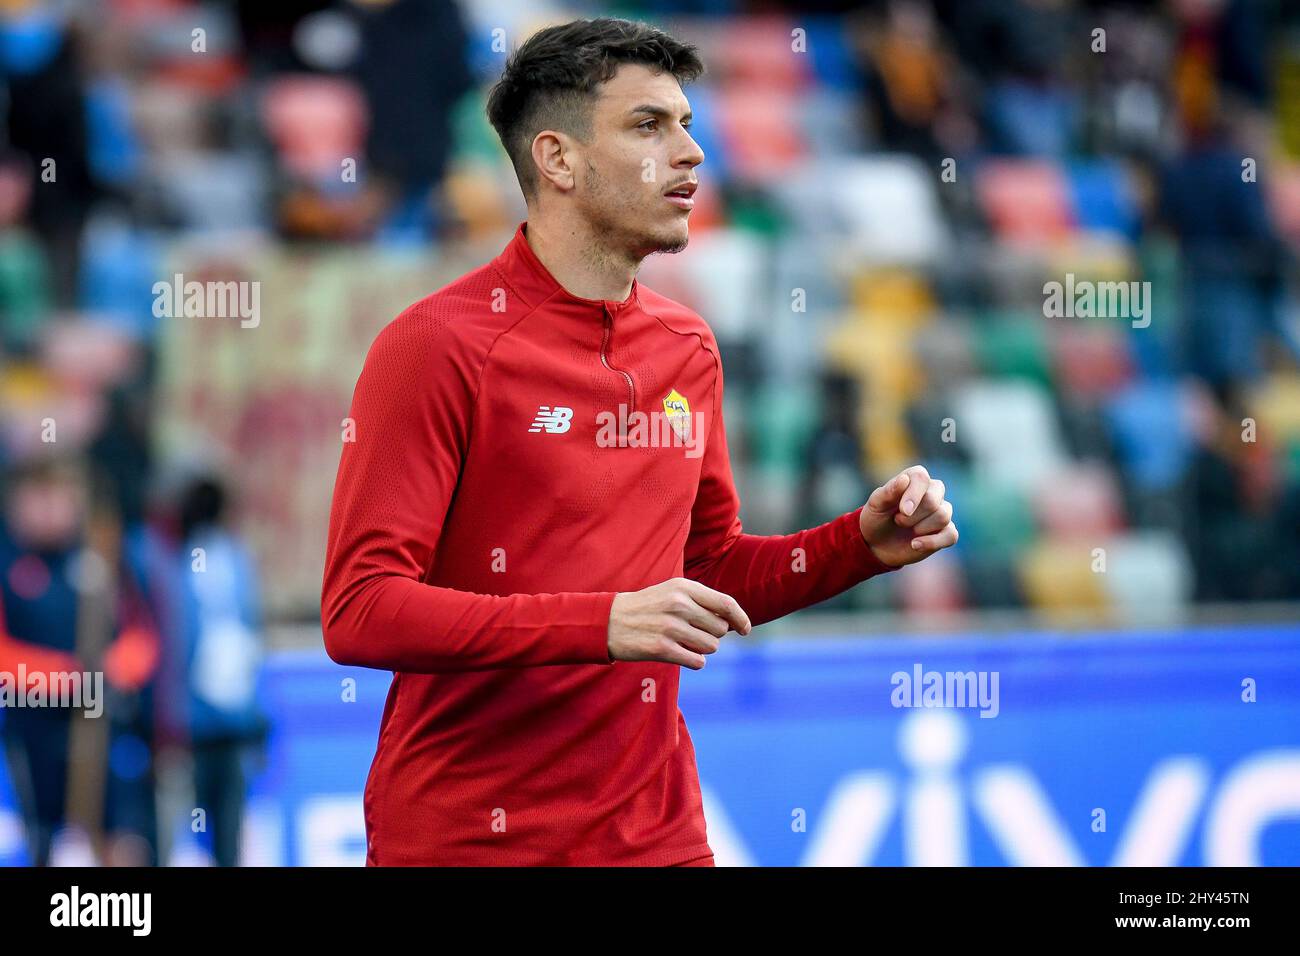 Udine, Italy. 13th Mar, 2022. Roma's Roger Ibanez da Silva portrait during Udinese Calcio vs AS Roma, italian soccer Serie A match in Udine, Italy, March 13 2022 Credit: Independent Photo Agency/Alamy Live News Stock Photo